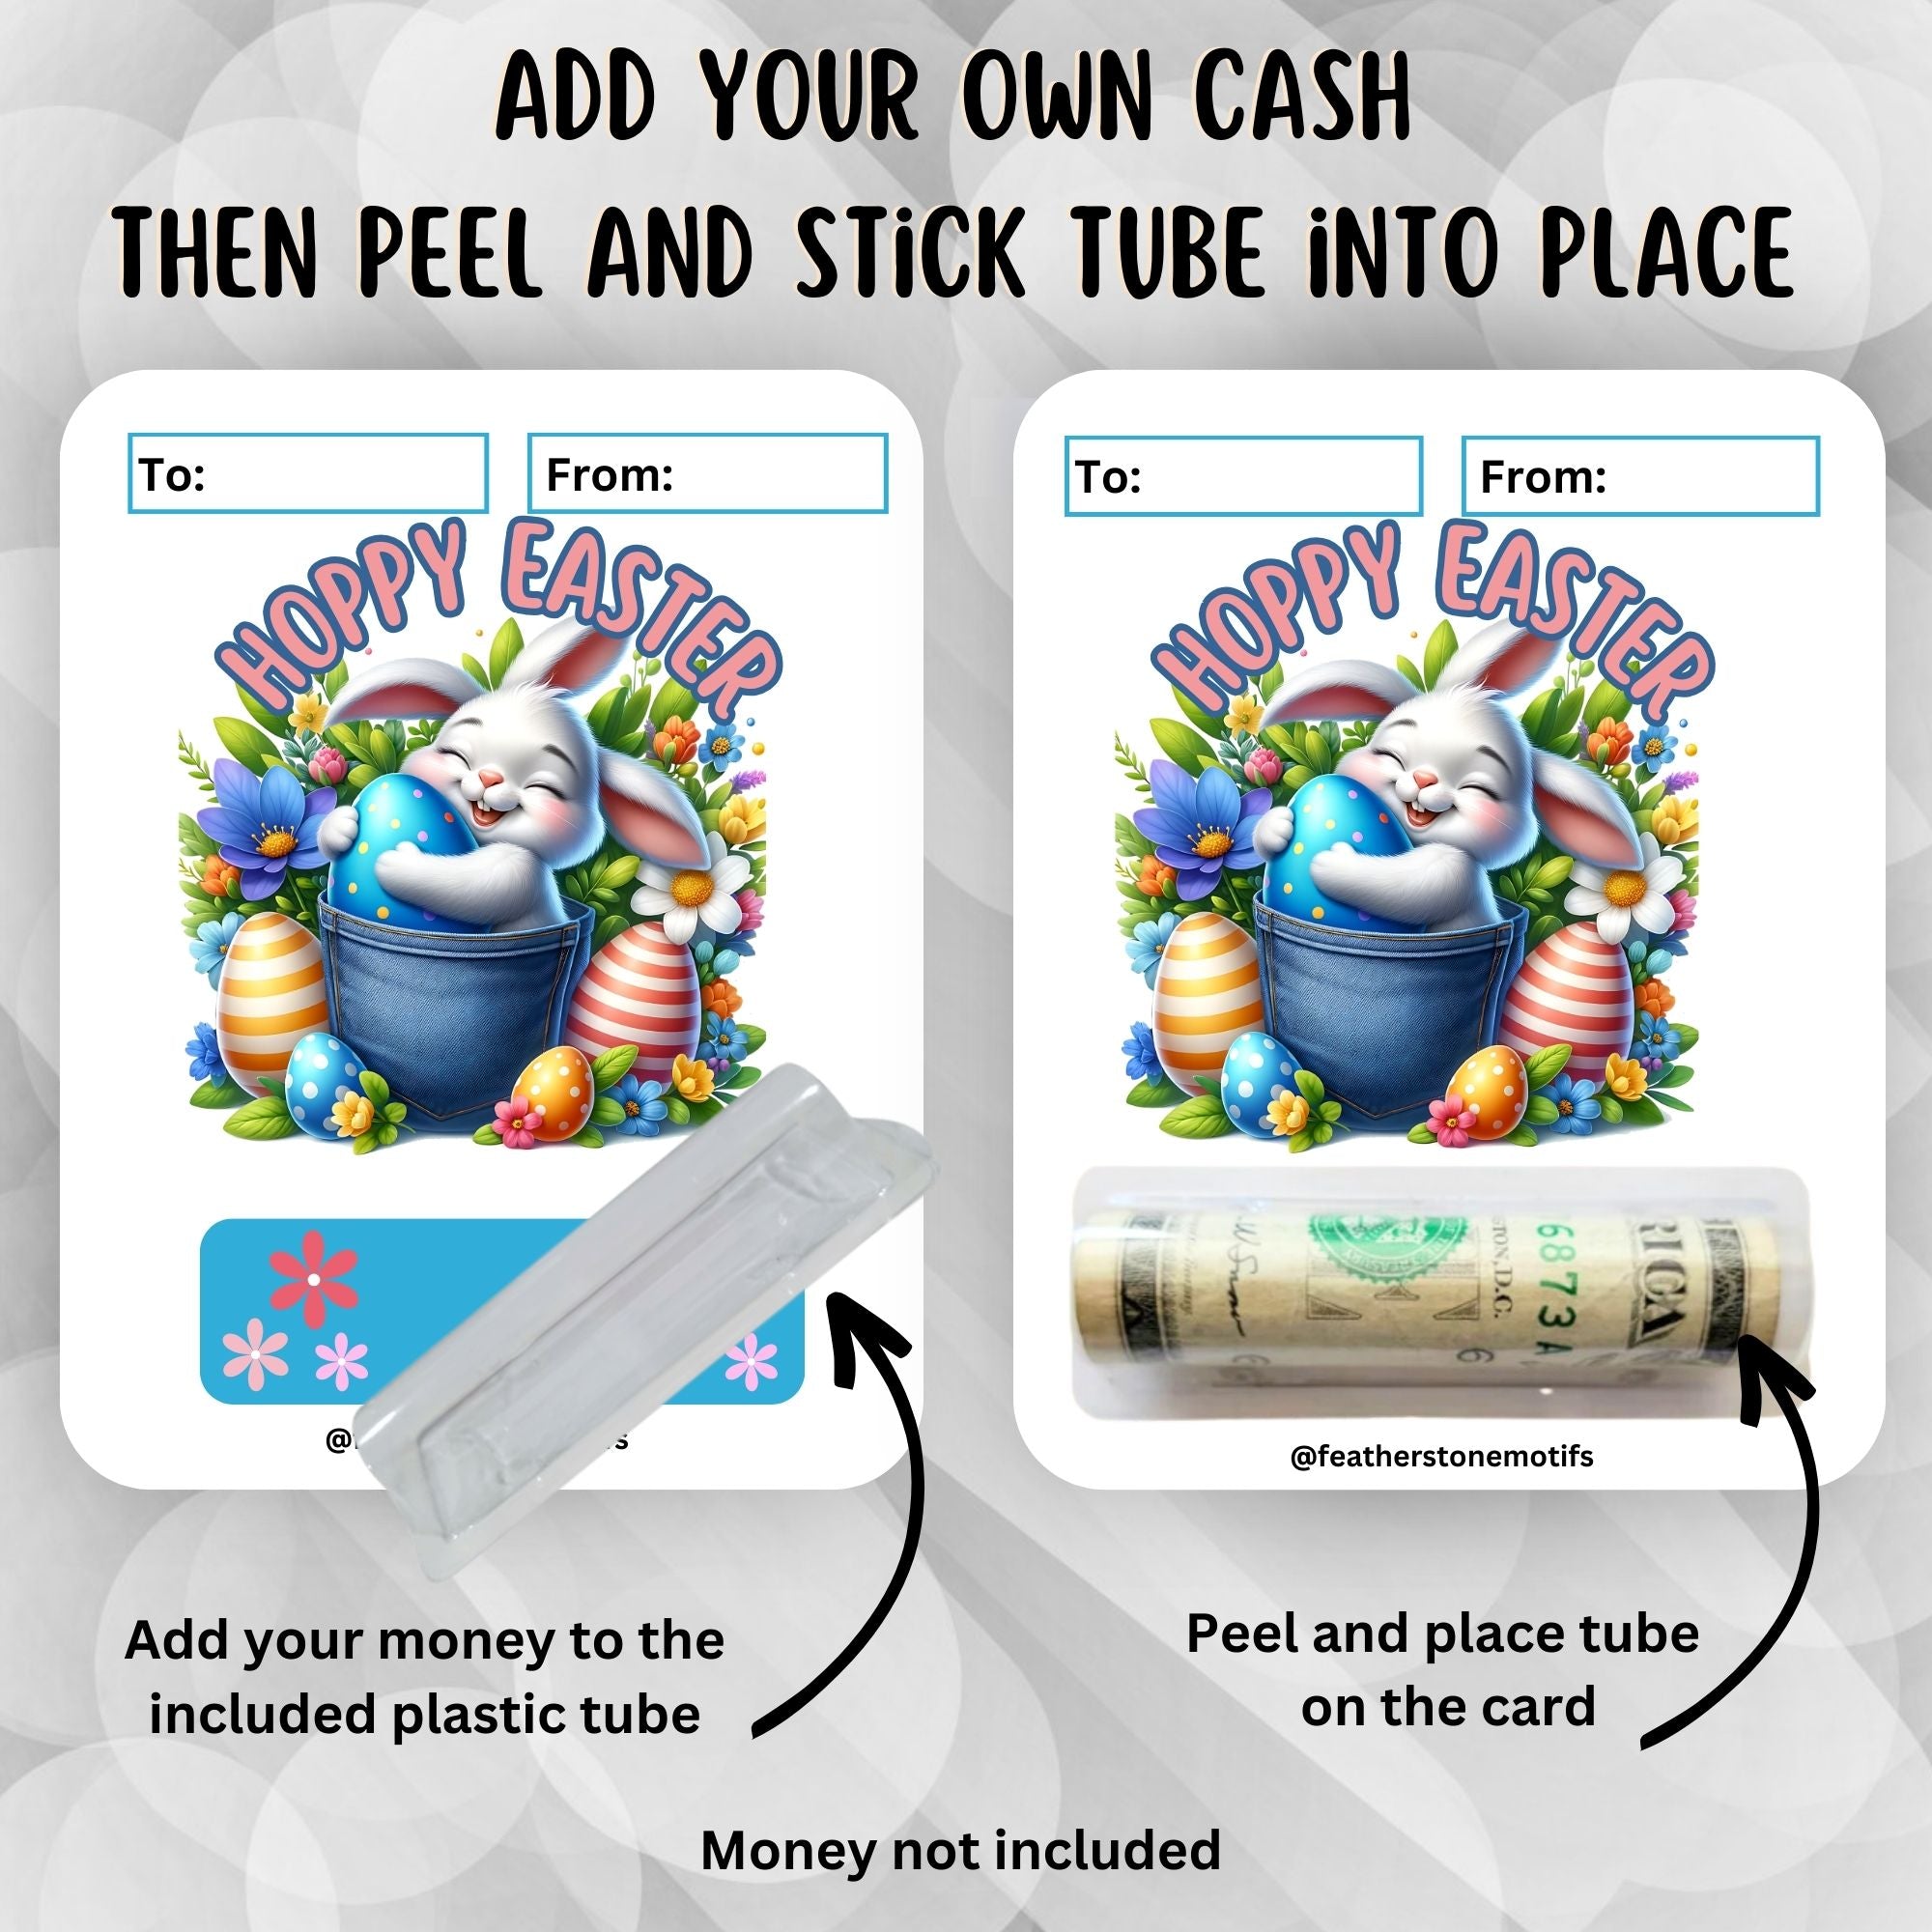 This image shows how to attach the money tube to the Hoppy Easter 1 Easter Money Card.